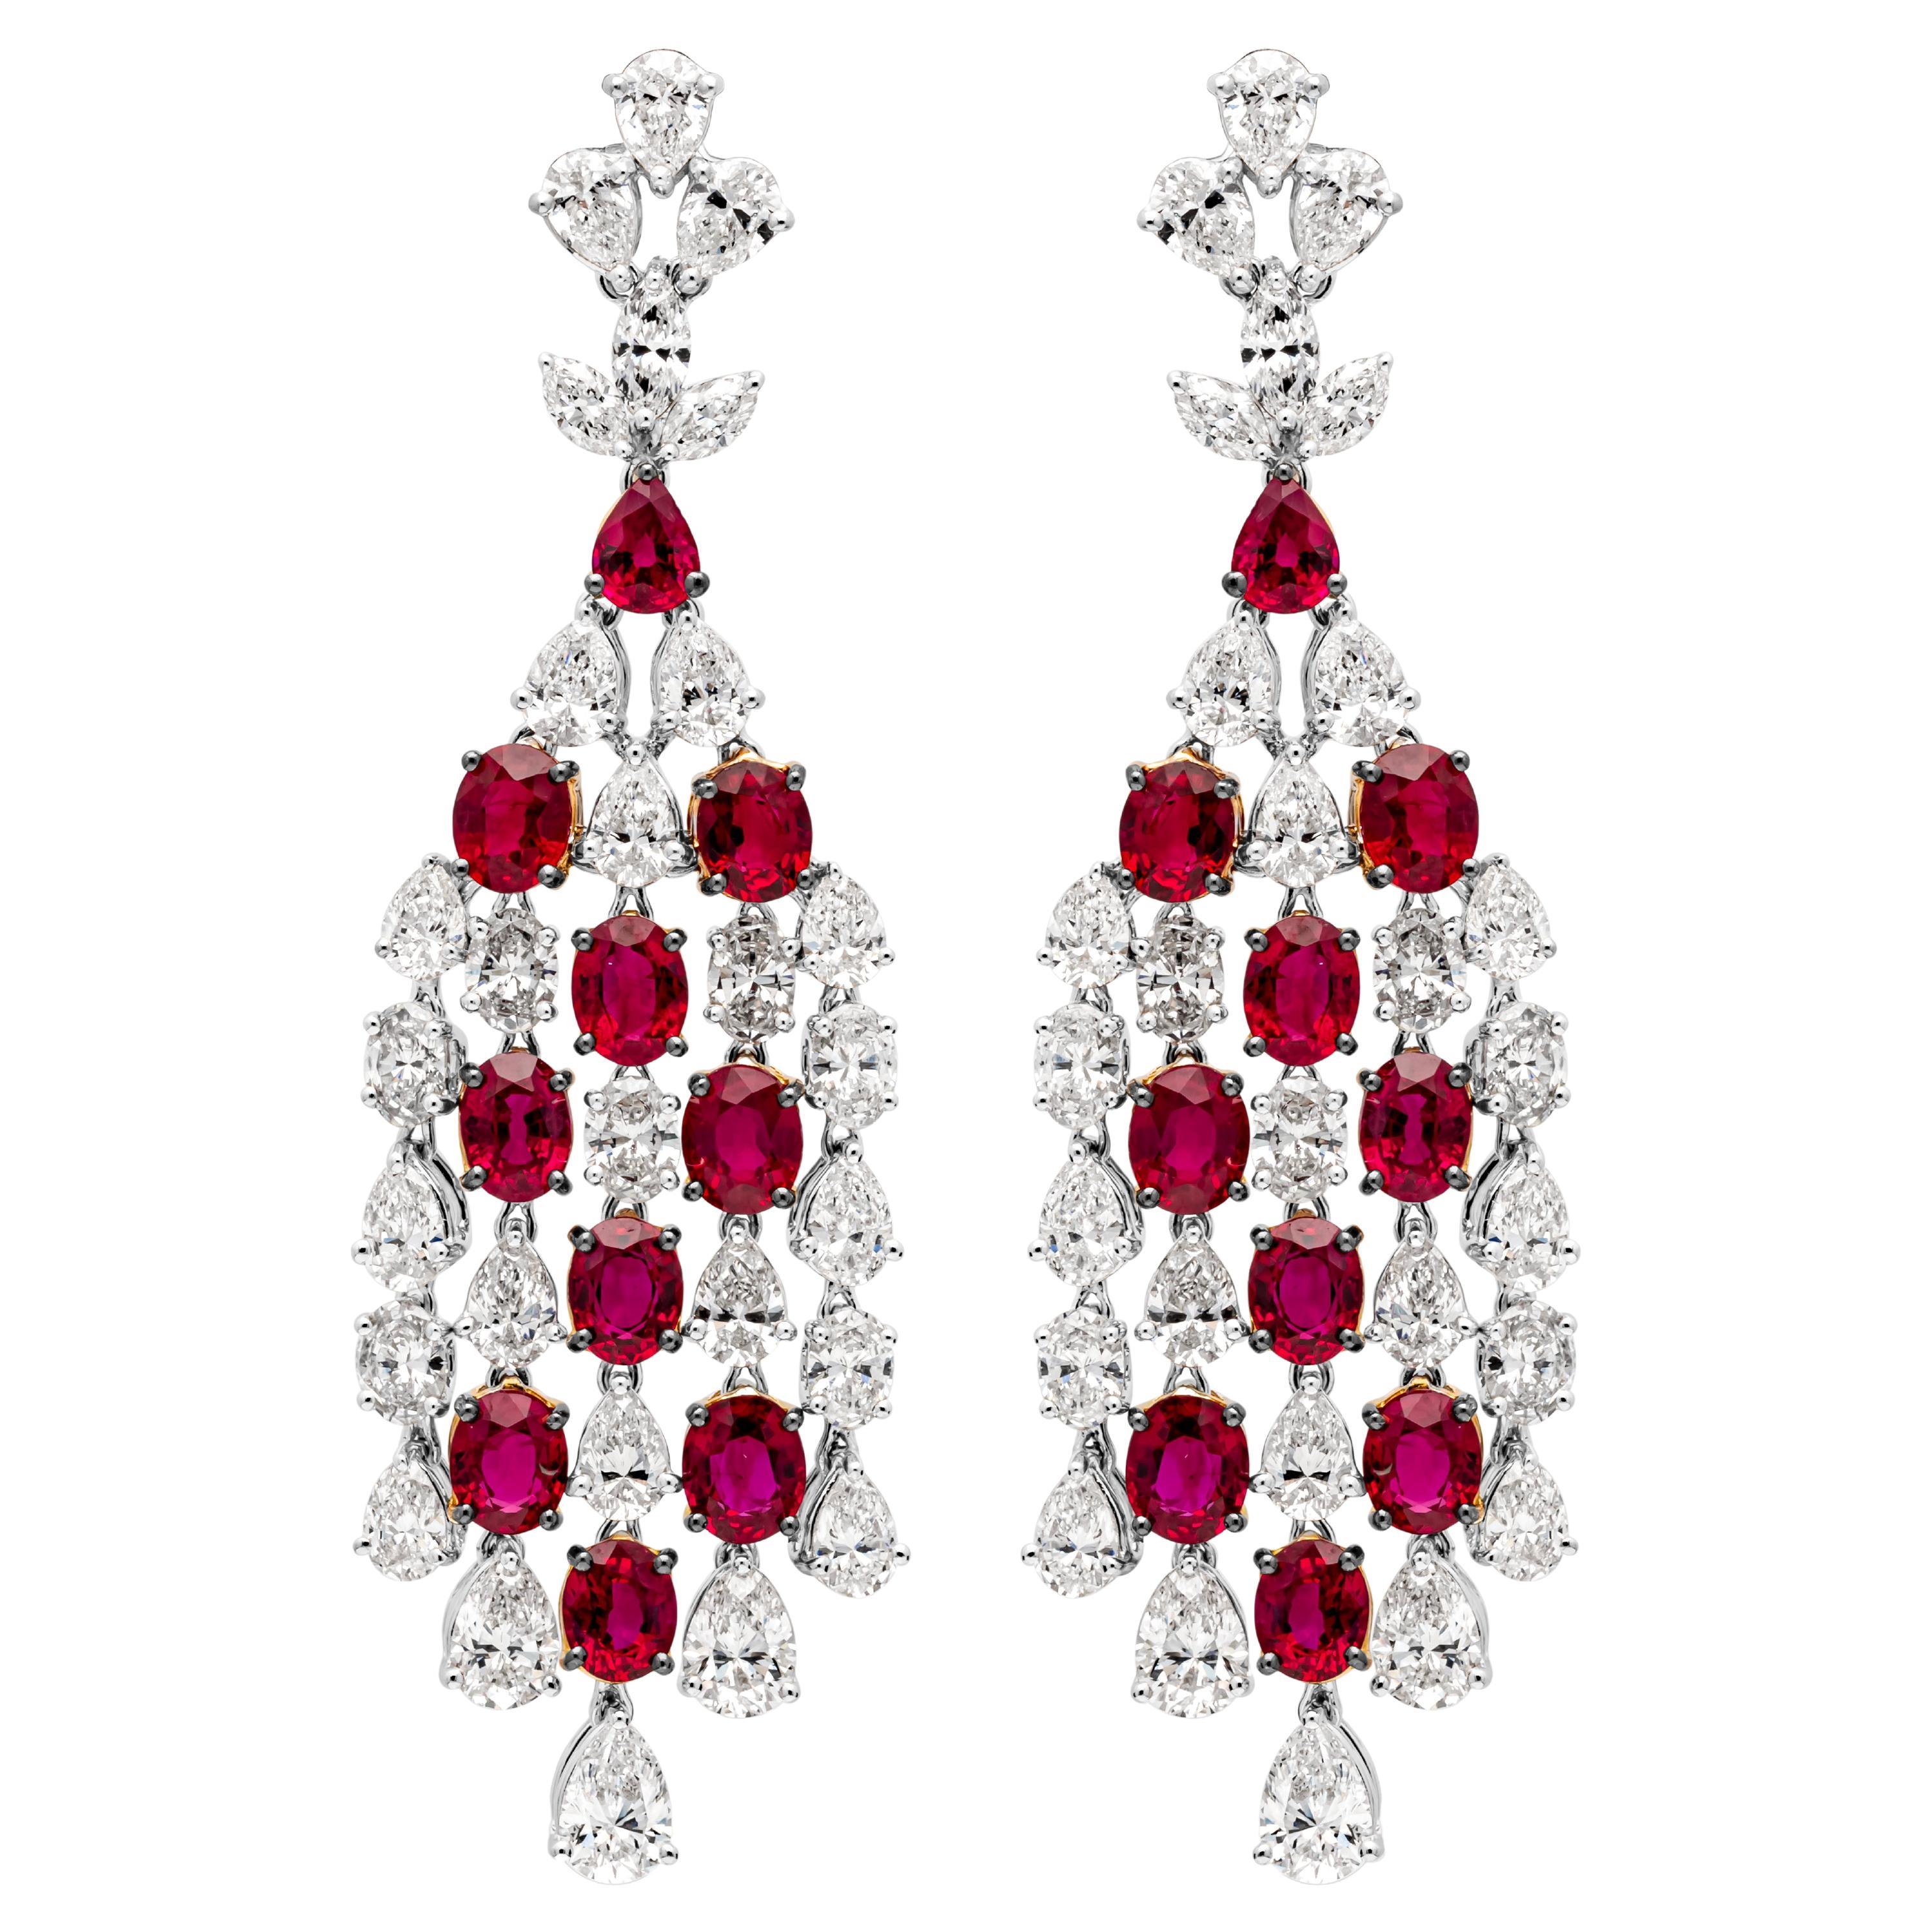 18.10 Carats Total Mixed Cut Ruby & Diamond White Gold Chandelier Earrings